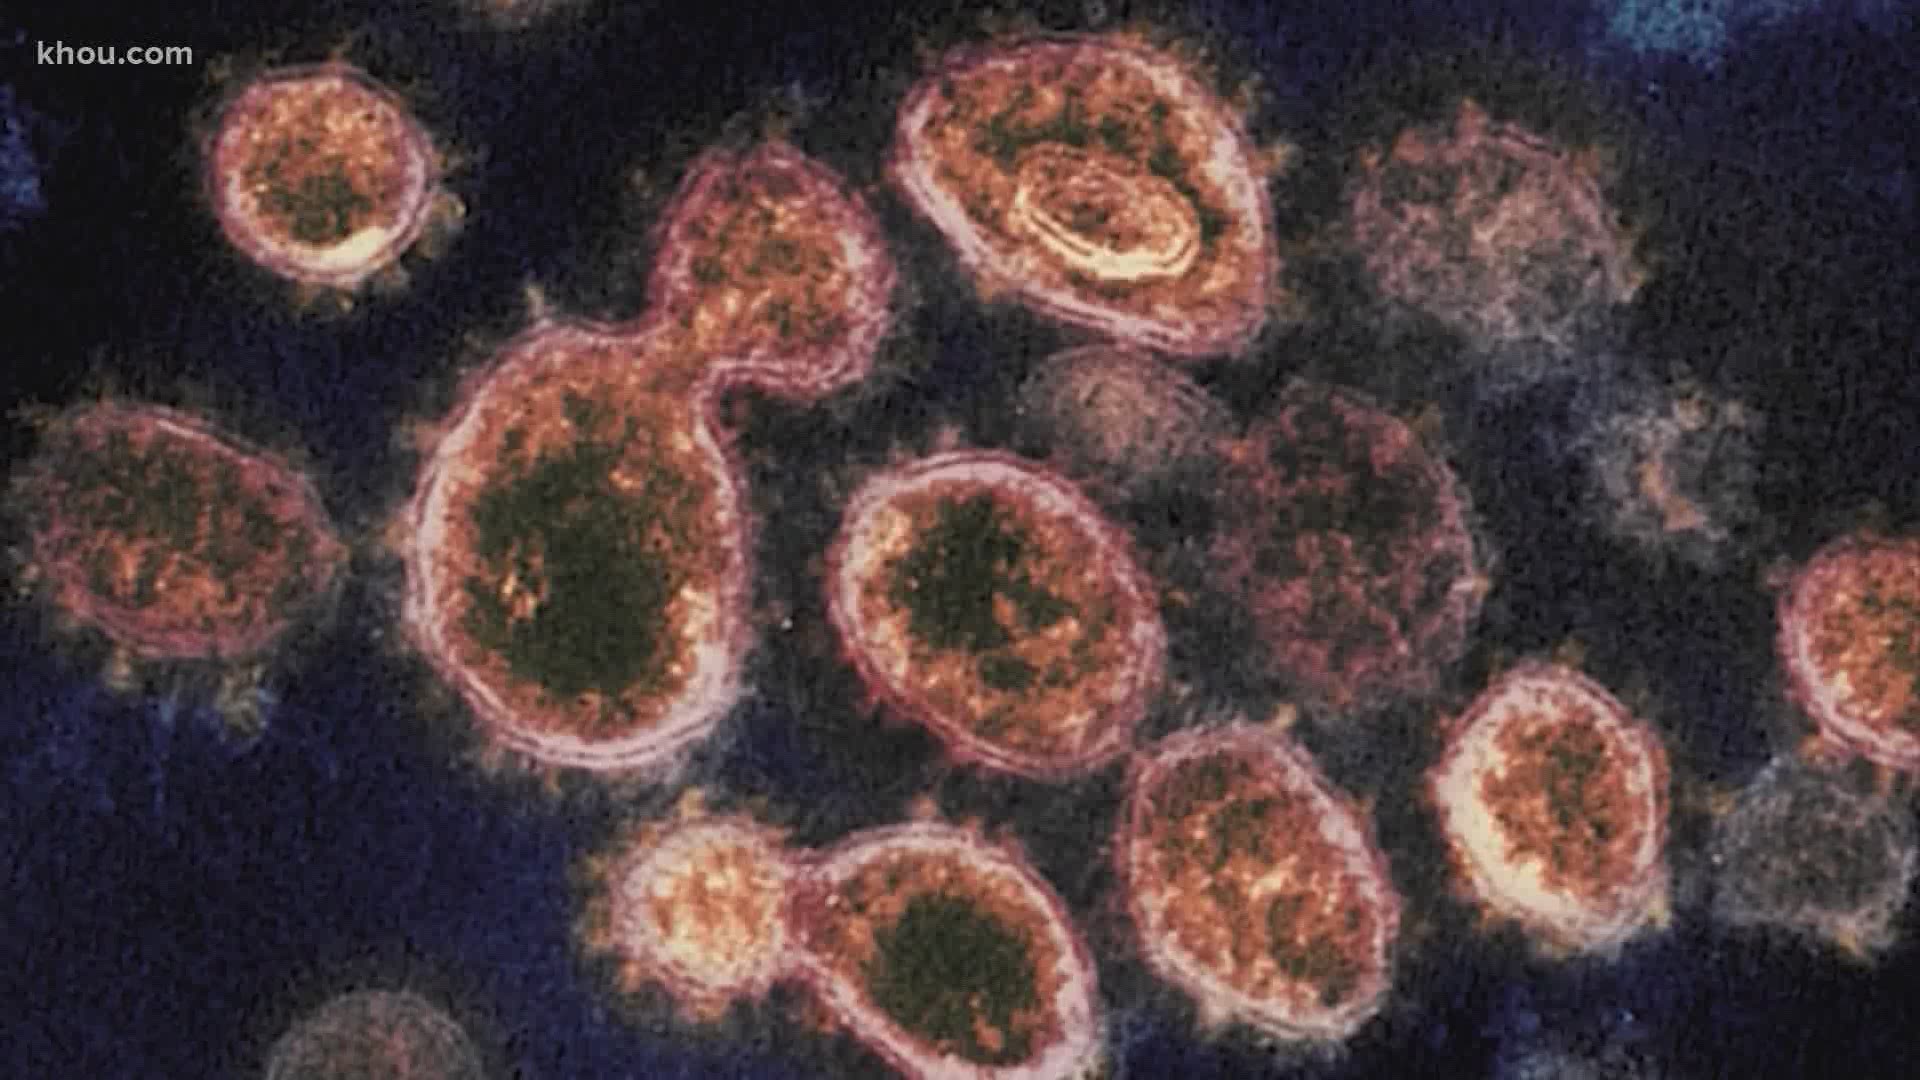 While the variant spreads more easily, researchers say its symptoms are not more severe than the previous versions of the virus.